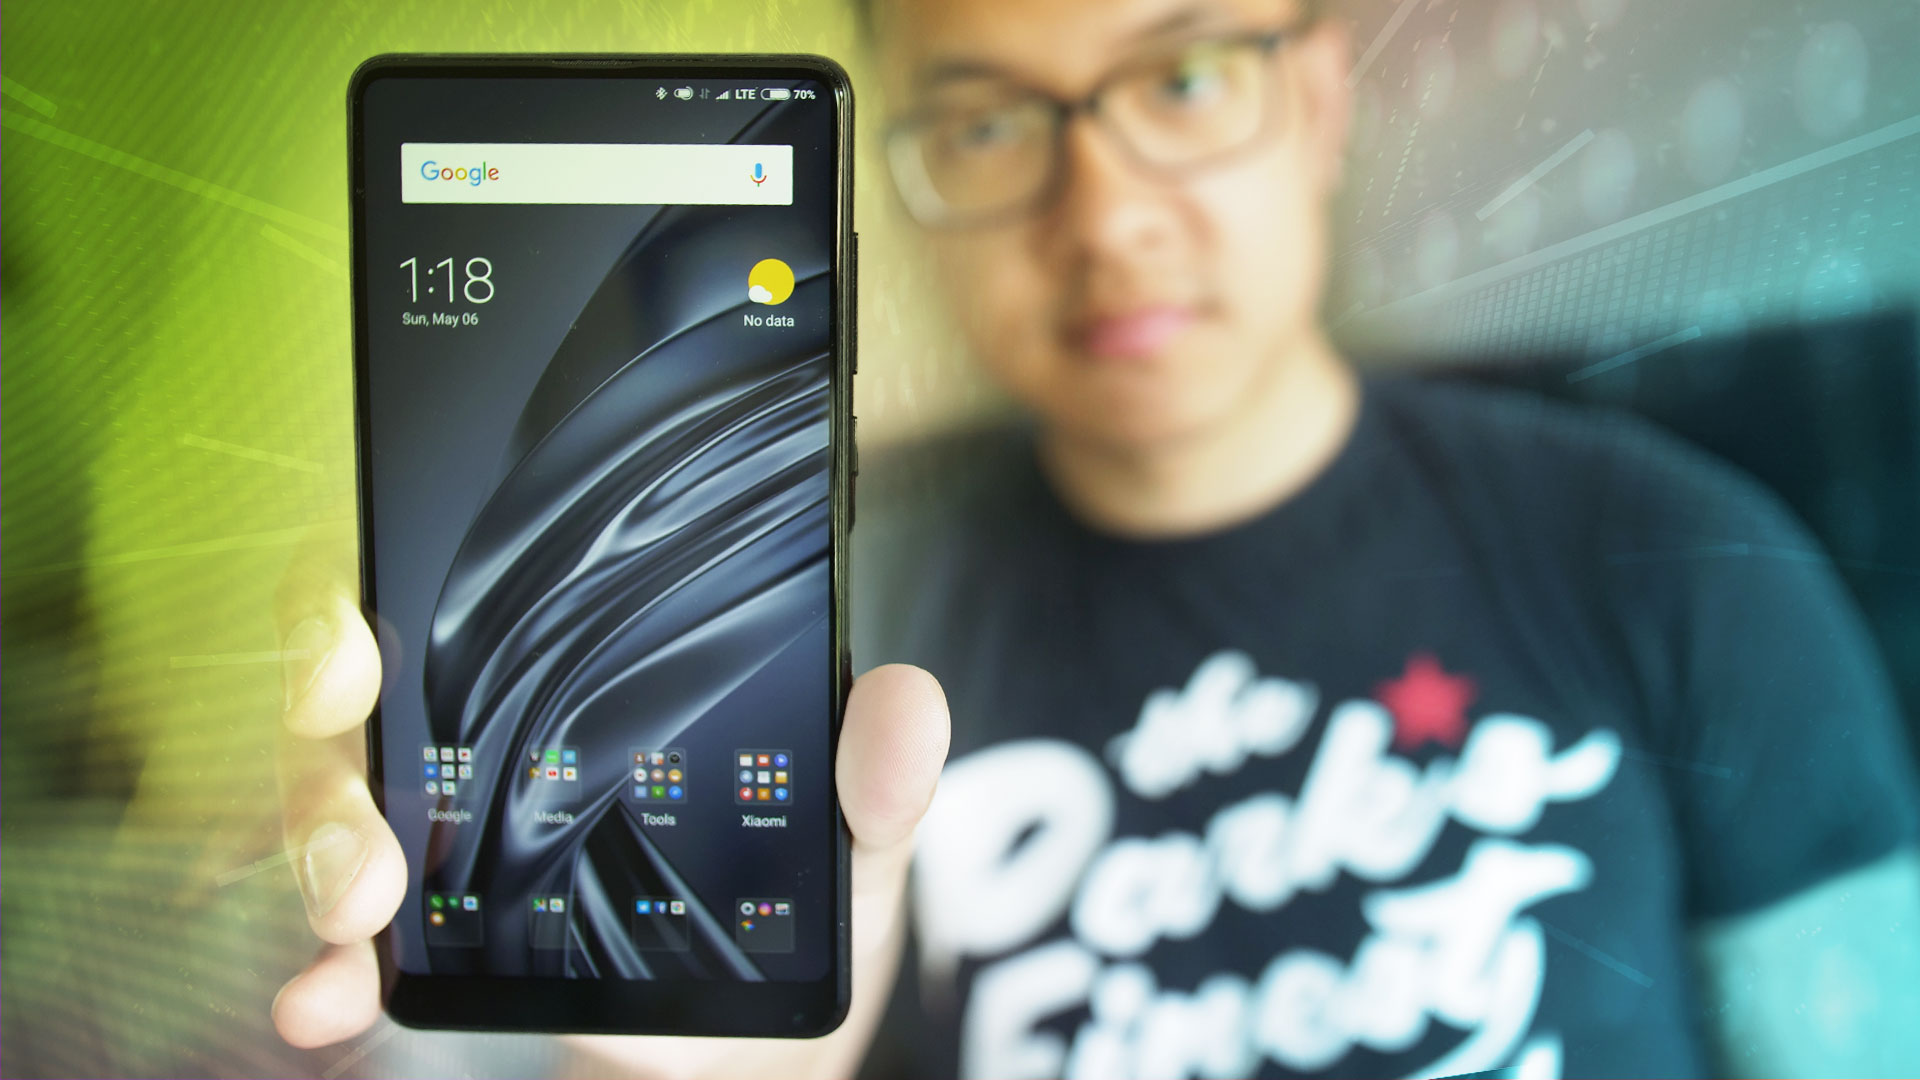 Xiaomi Mi Mix 2S Review: The luster remains